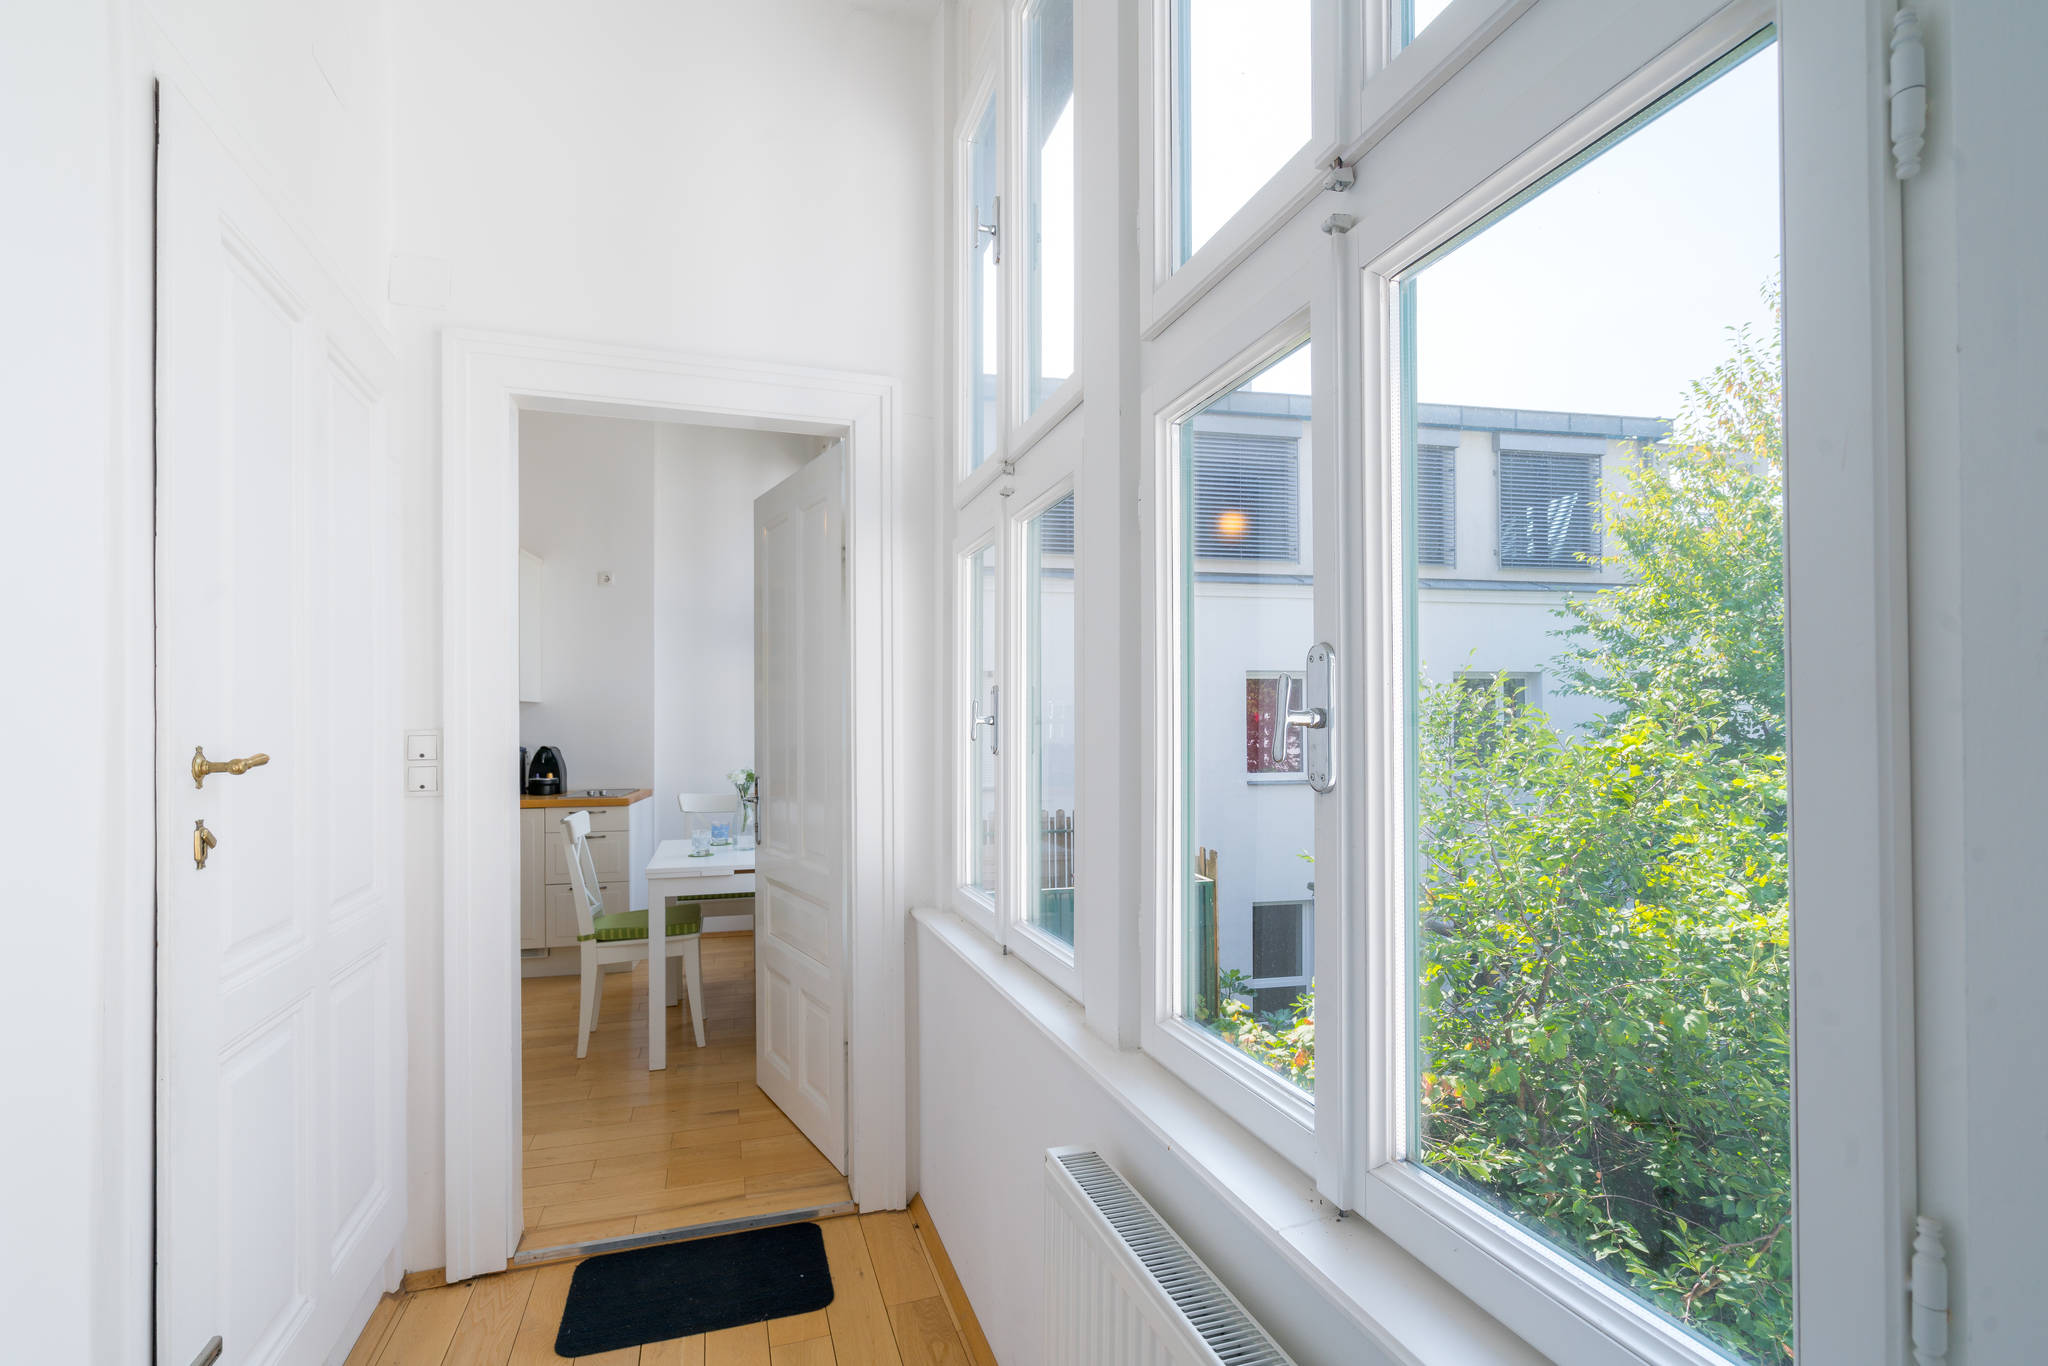 Property Image 2 - Bright apartment with views over green inner courtyard, close to the metro in Vienna